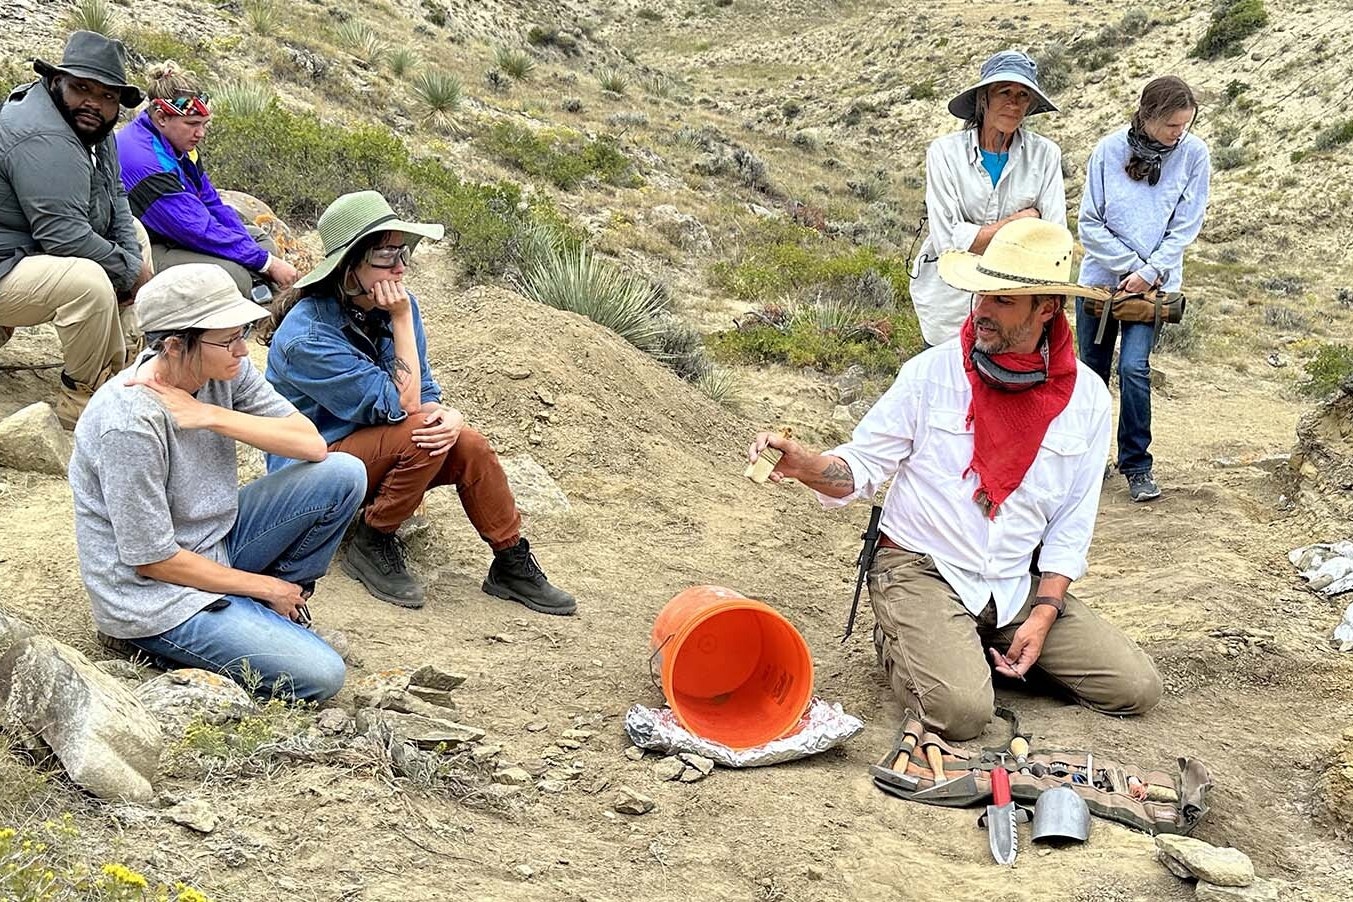 Matt Mossbrucker explains the excavation process to the citizen scientists of the Triceratops Gulch Project. Mossbrucker is the director of the Morrison Natural History Museum in Morrison, Colorado, and leads the summer programs for the Paleon Museum in Glenrock.